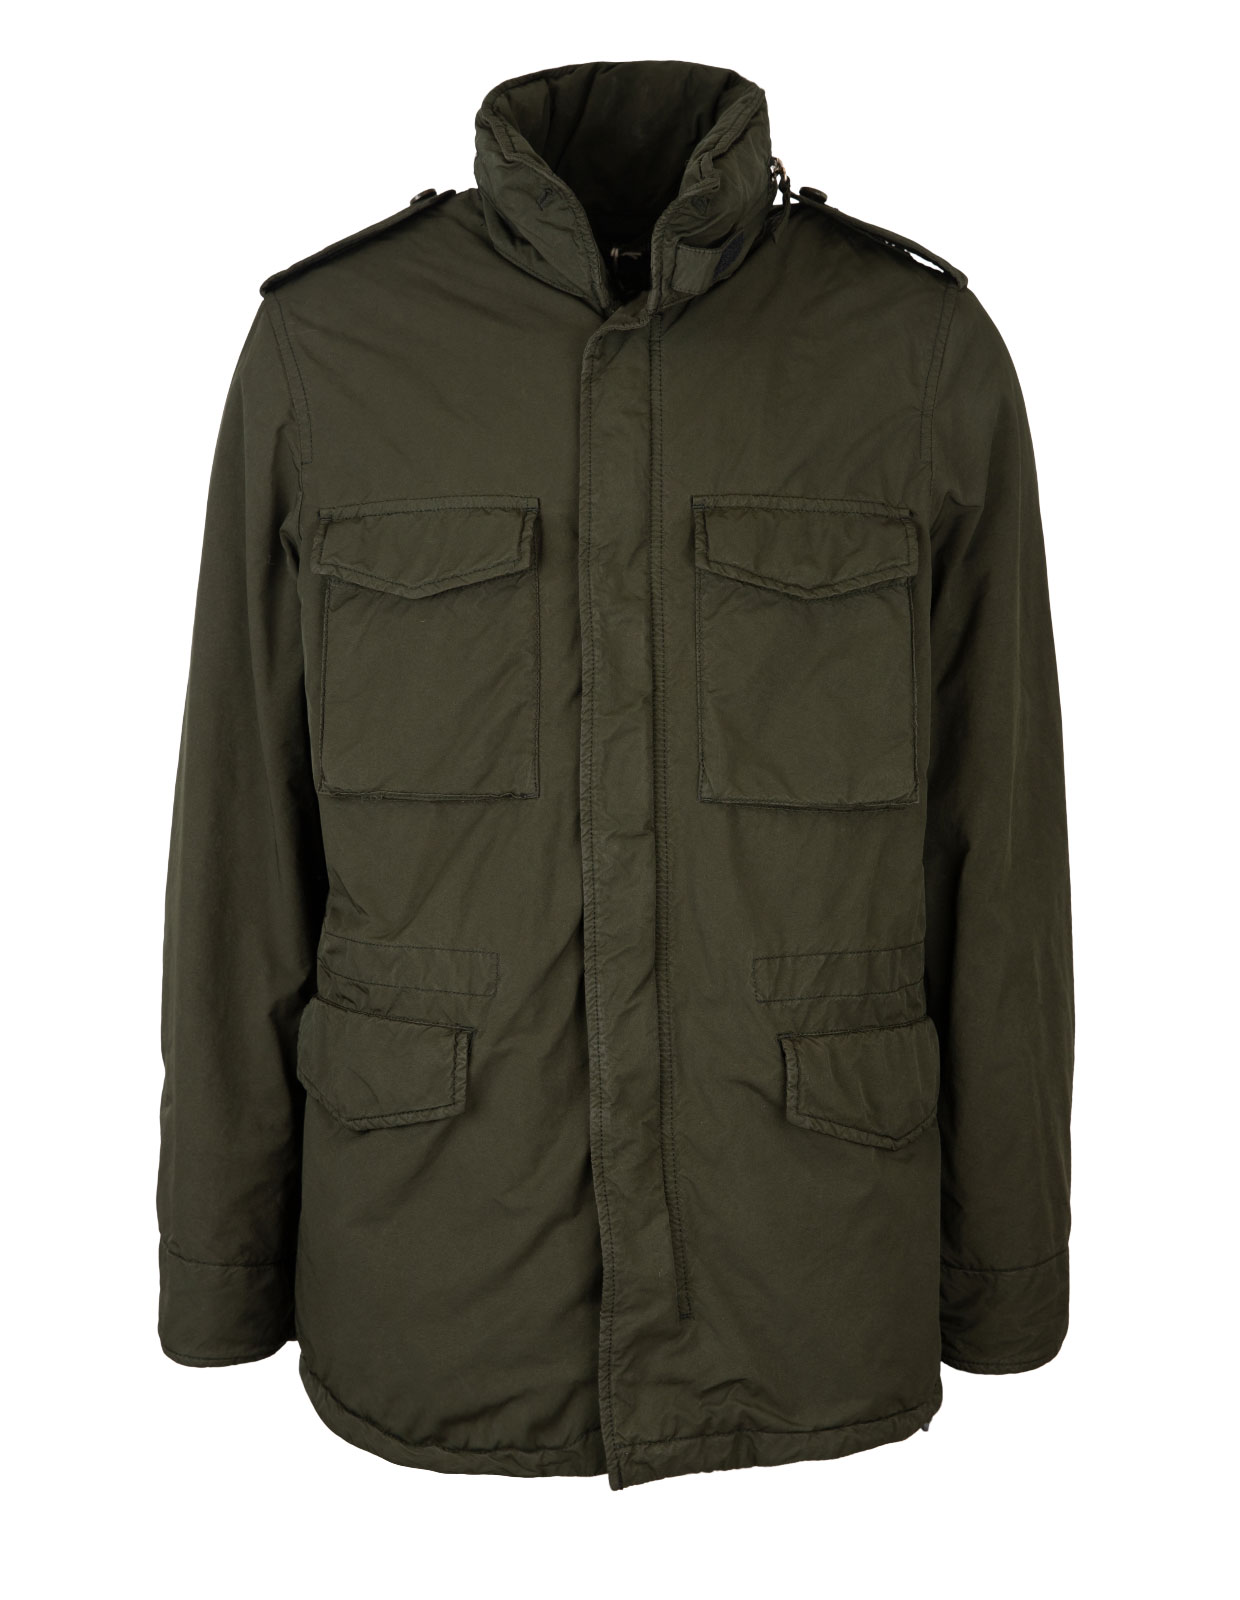 M65 New Camp Jacket Military